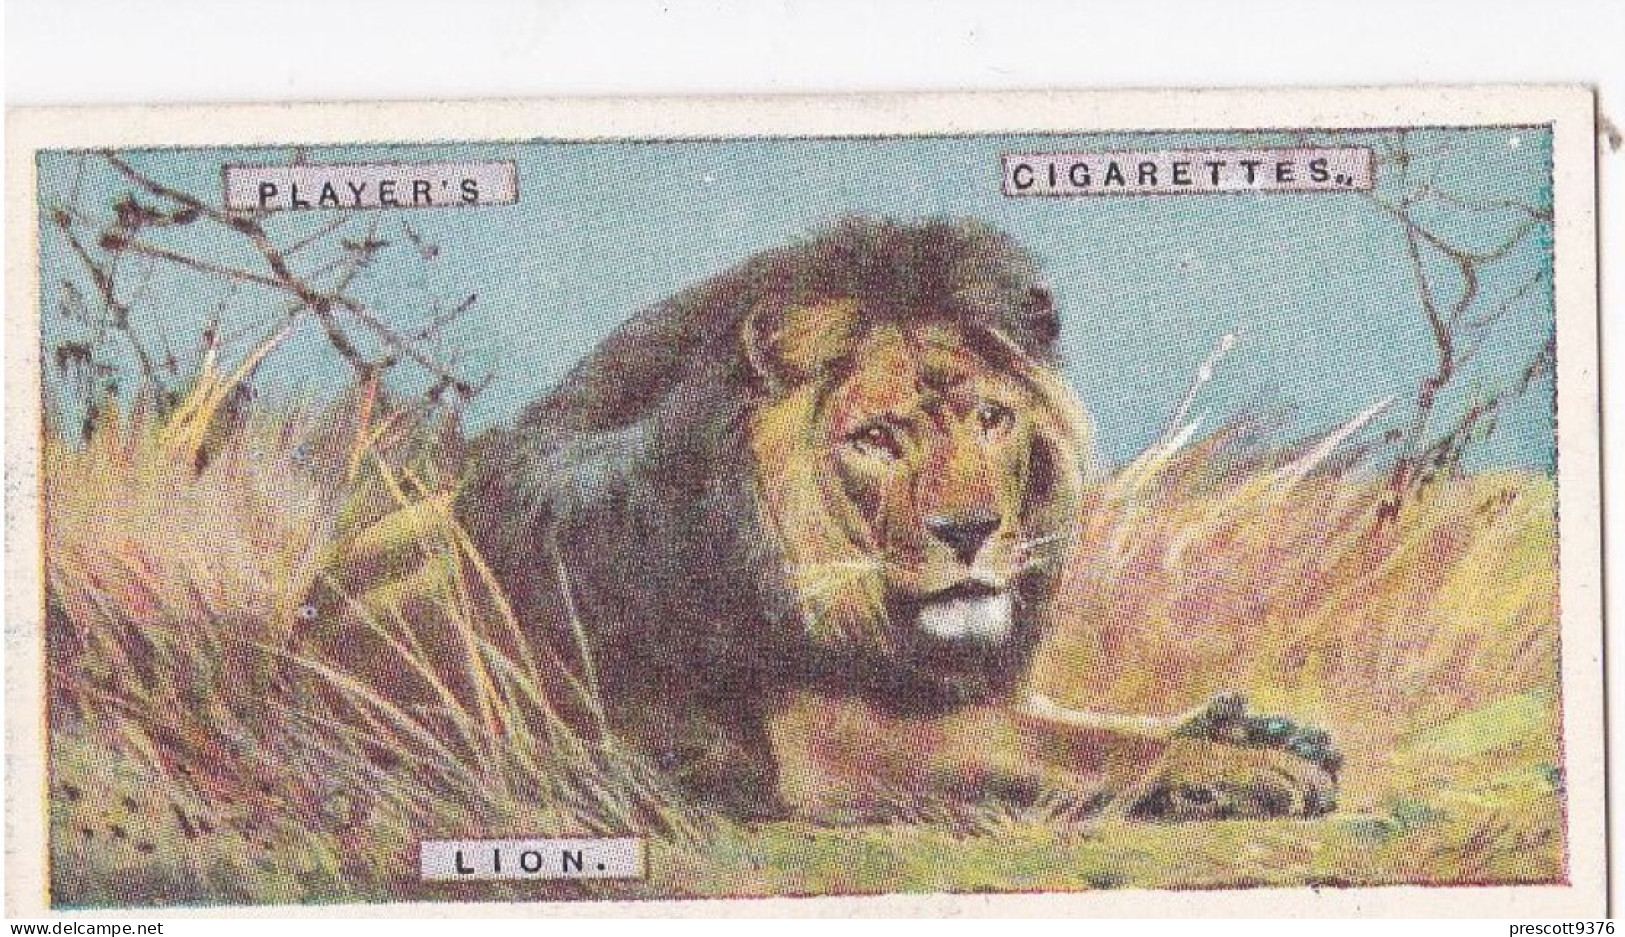 Natual History 1924 - Players Cigarette Card - 27 LION - Player's